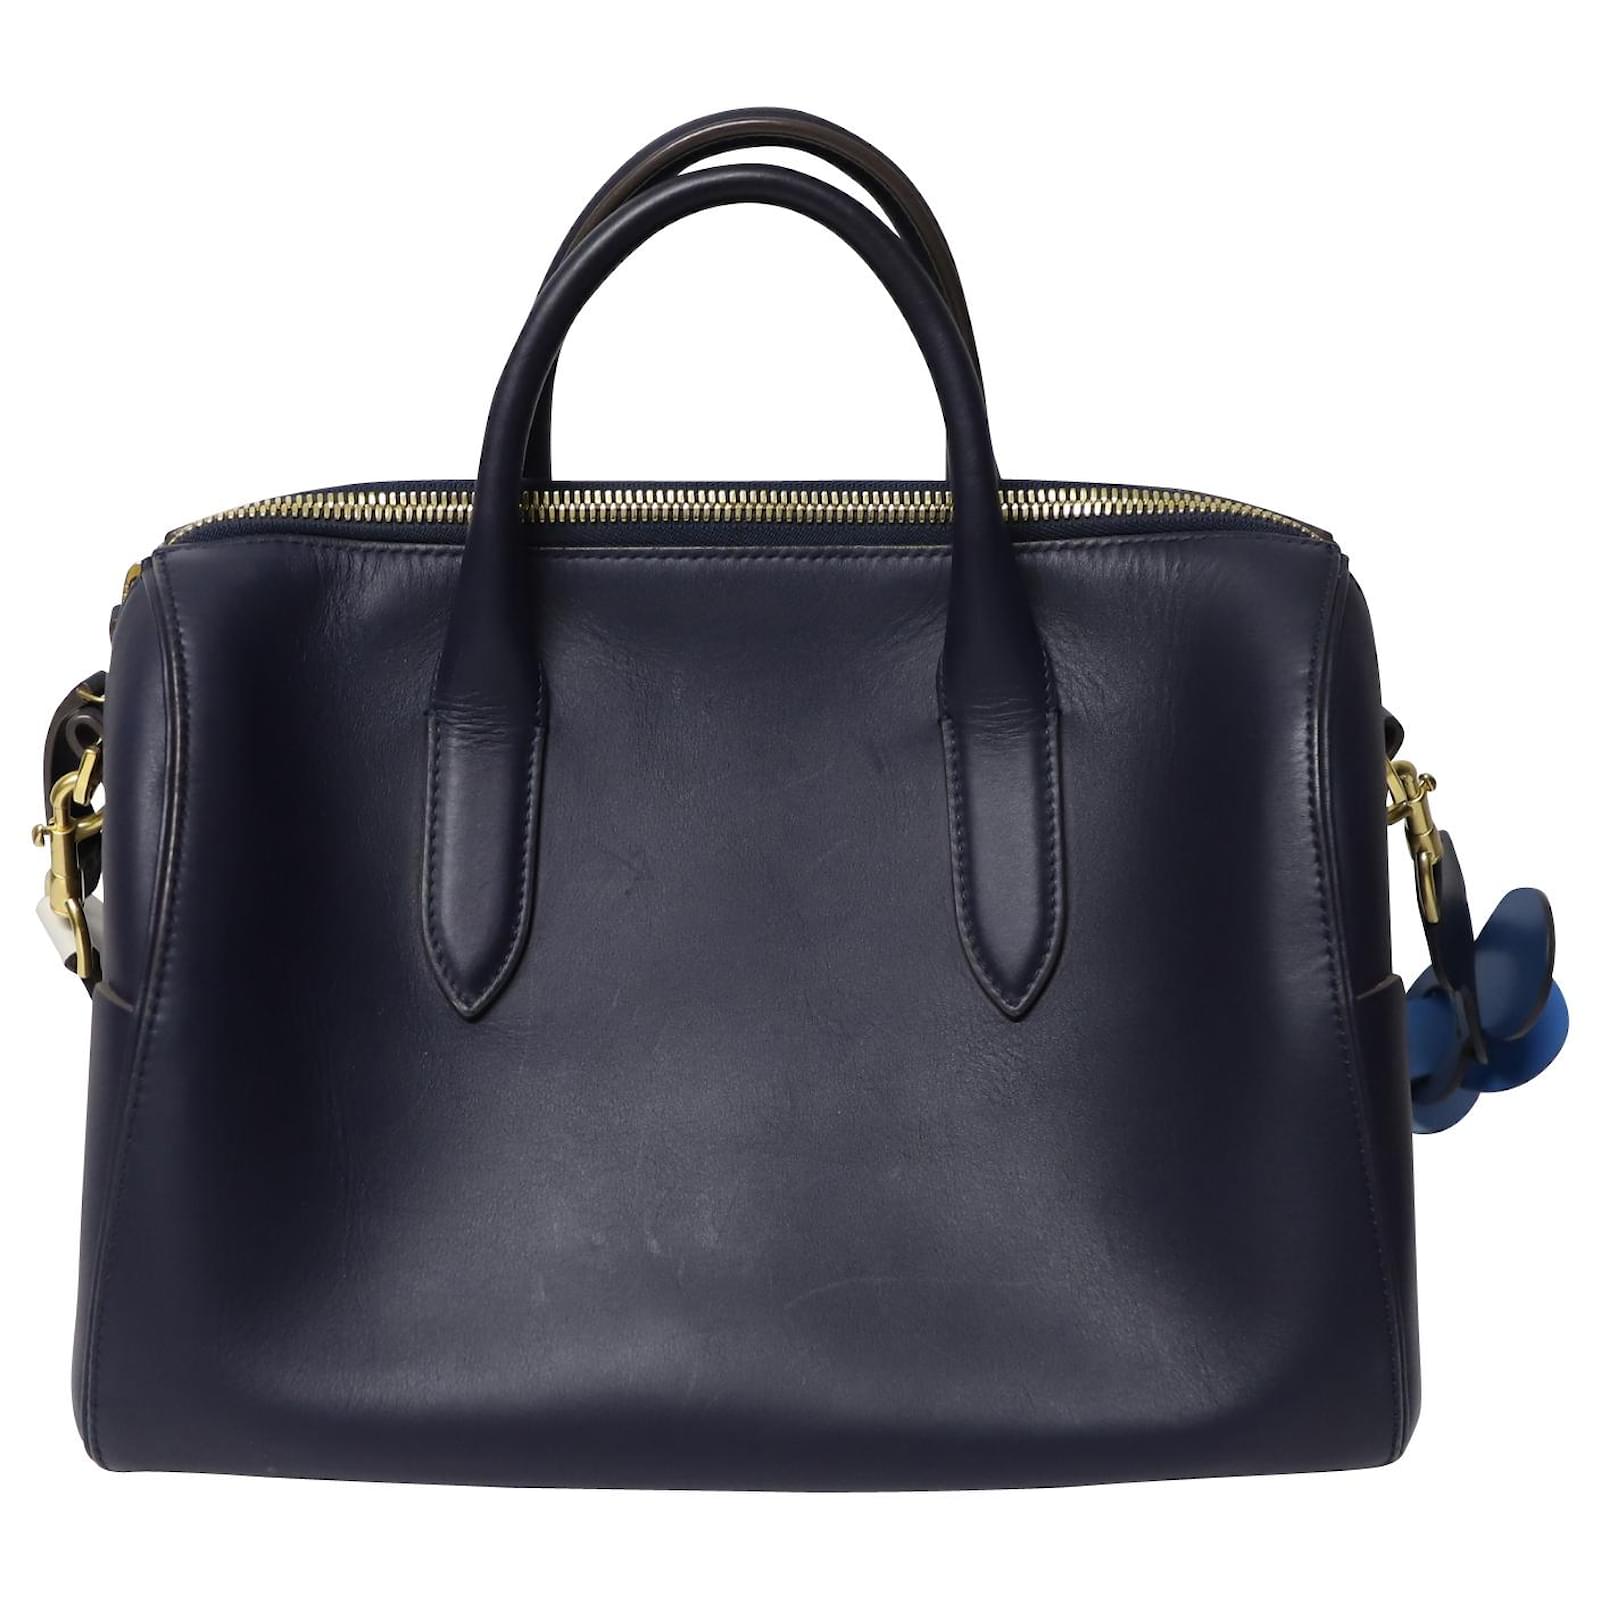 Anya Hindmarch Vere Barrel Bag with Multicolored Strap in Navy Blue ...